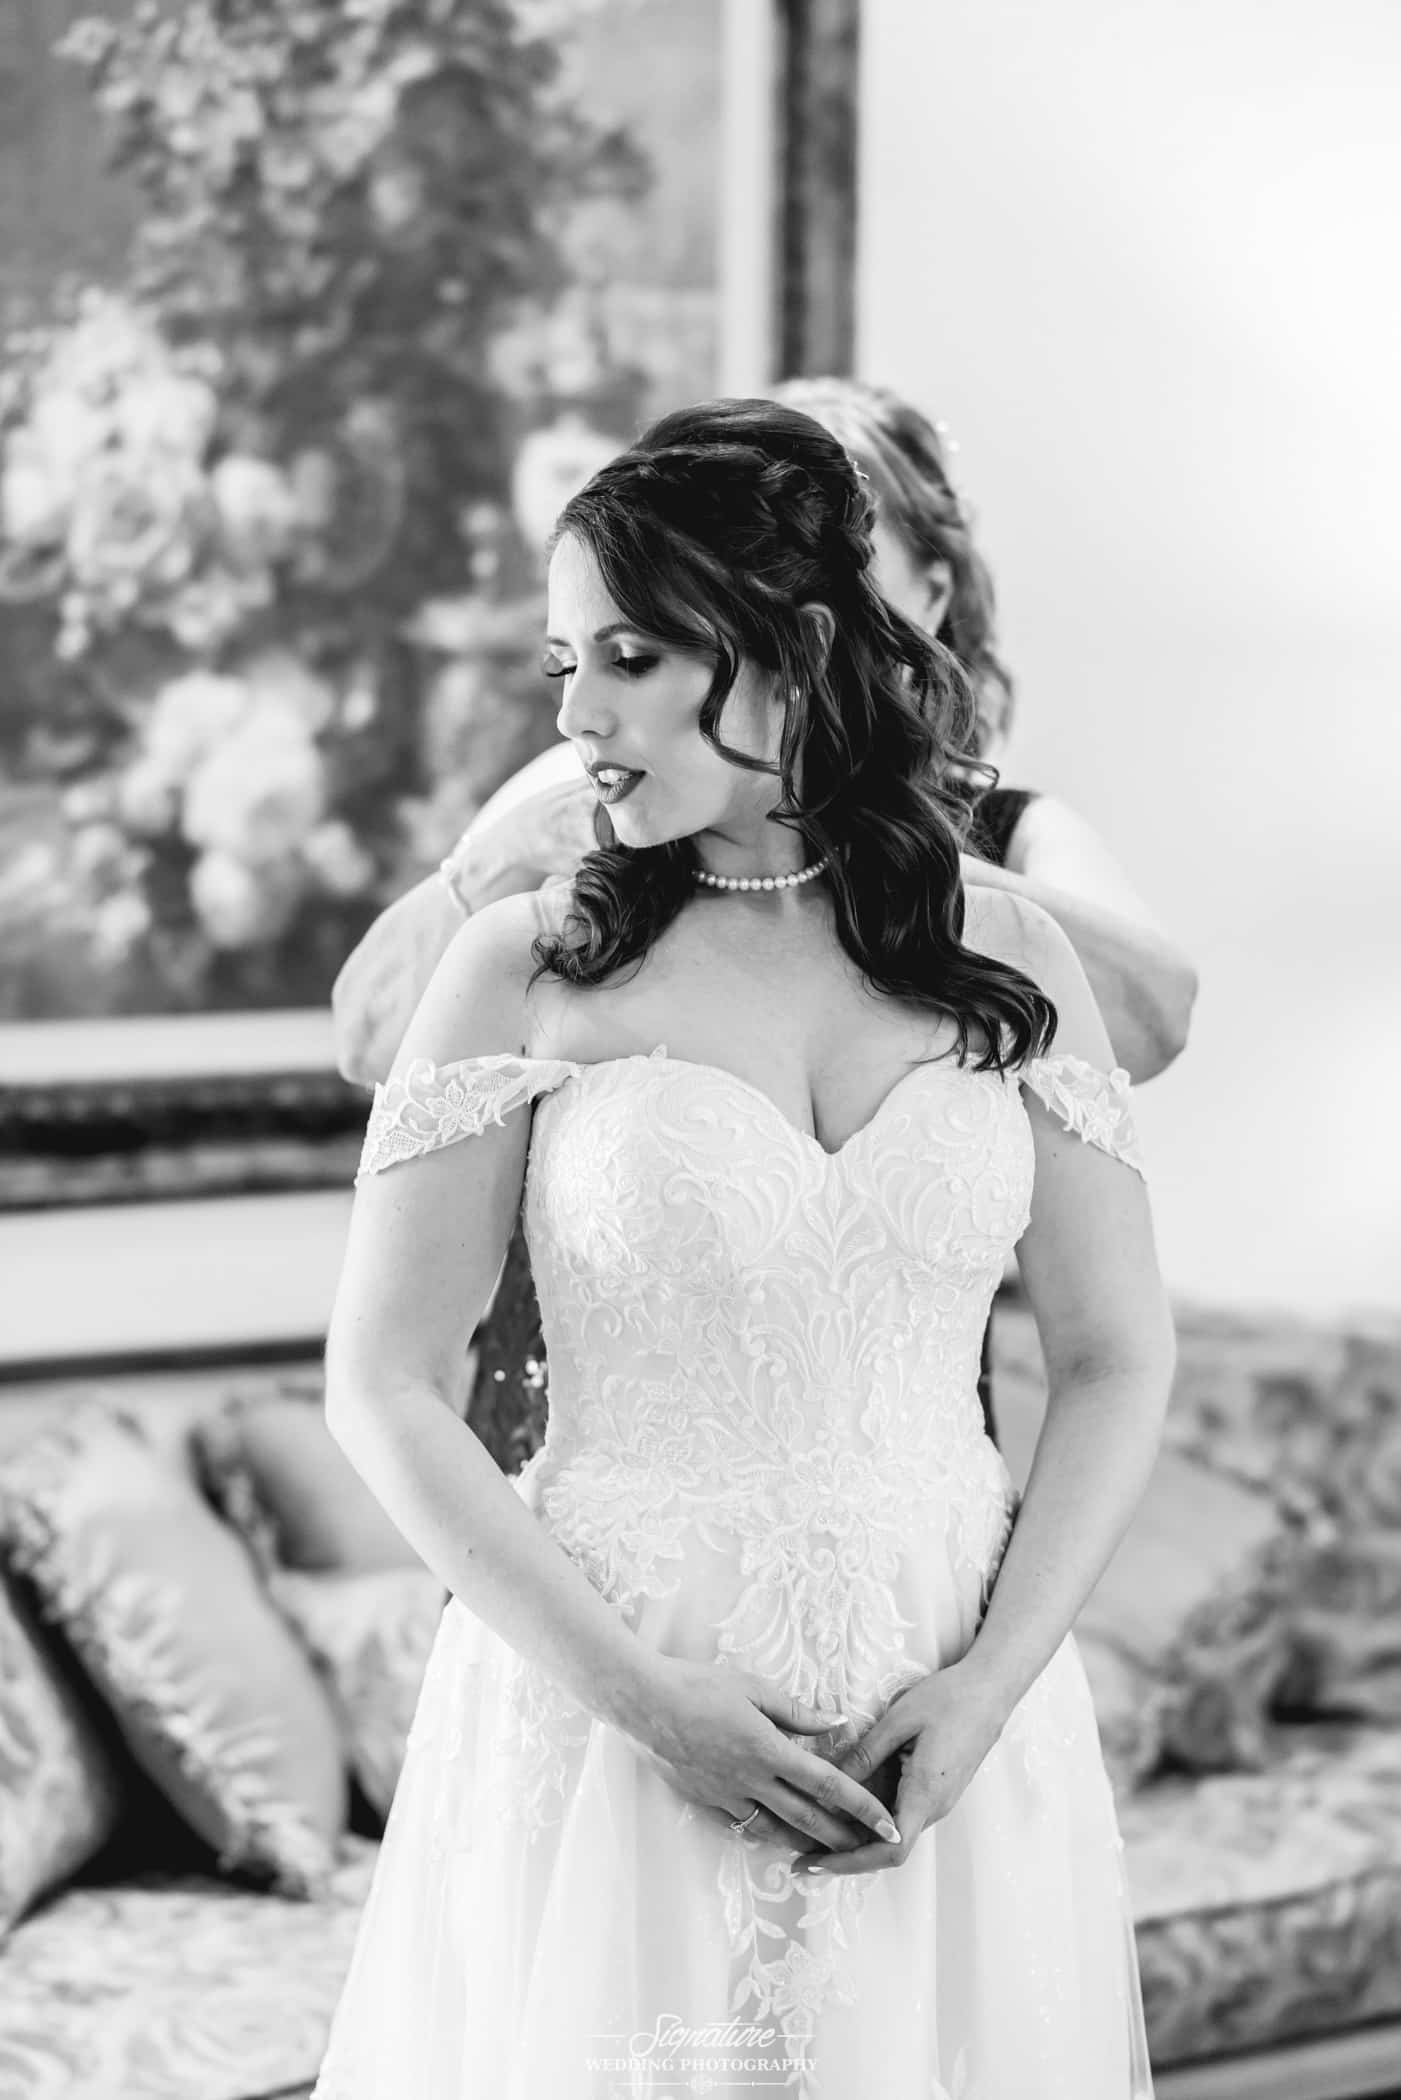 Bride looking off to side black and white